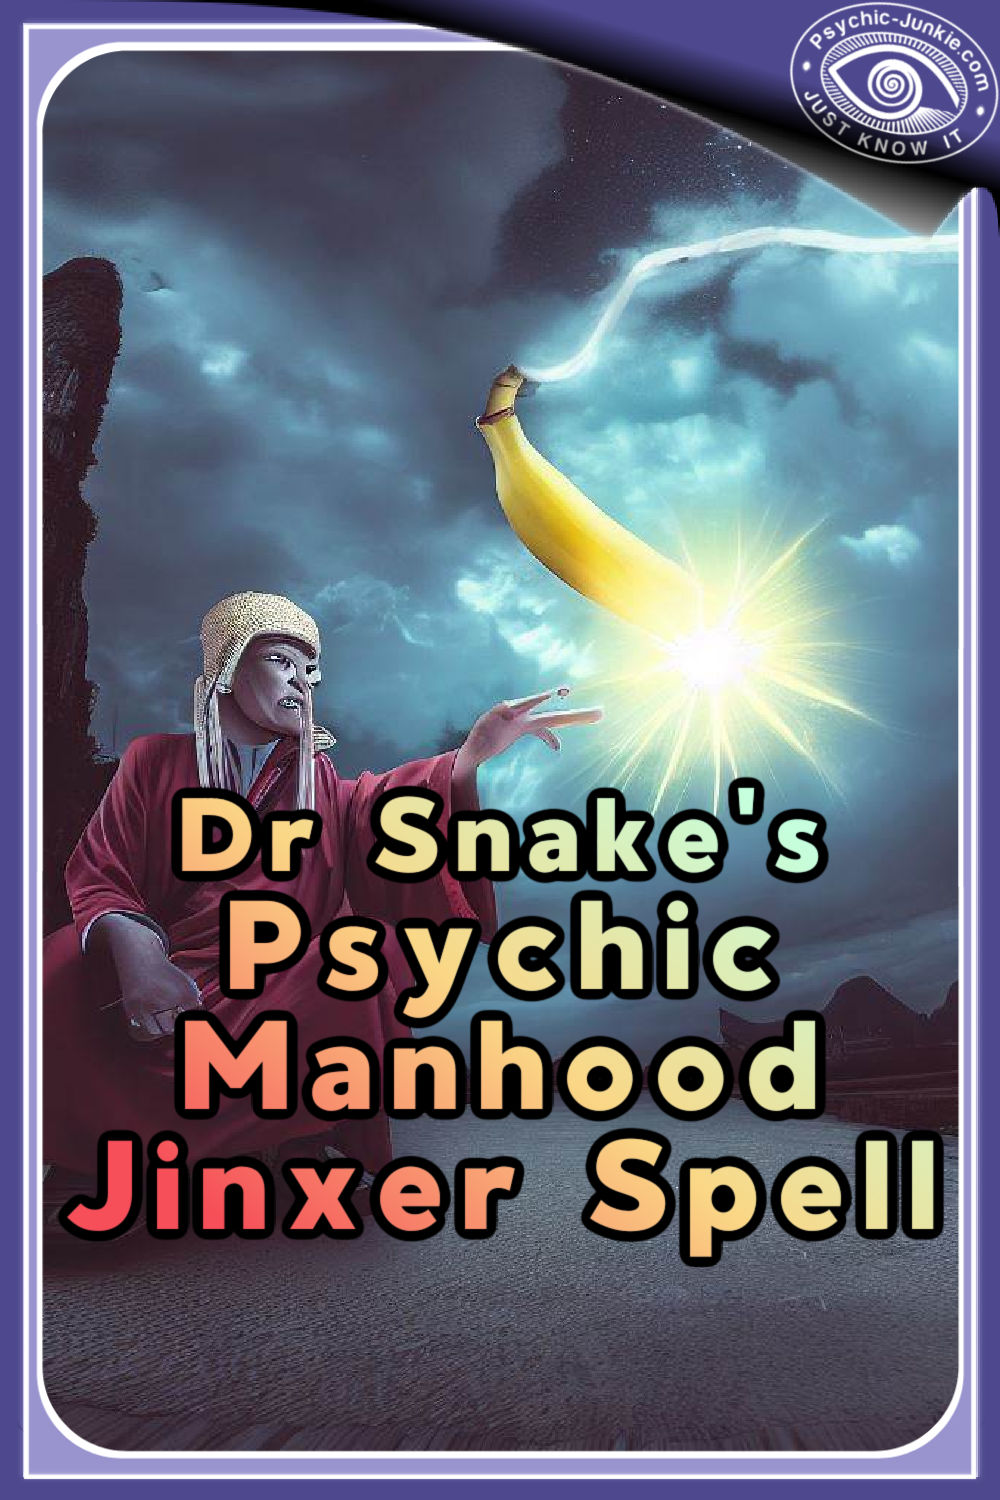 The psychic manhood jinxer spell is simple and straightforward to perform.